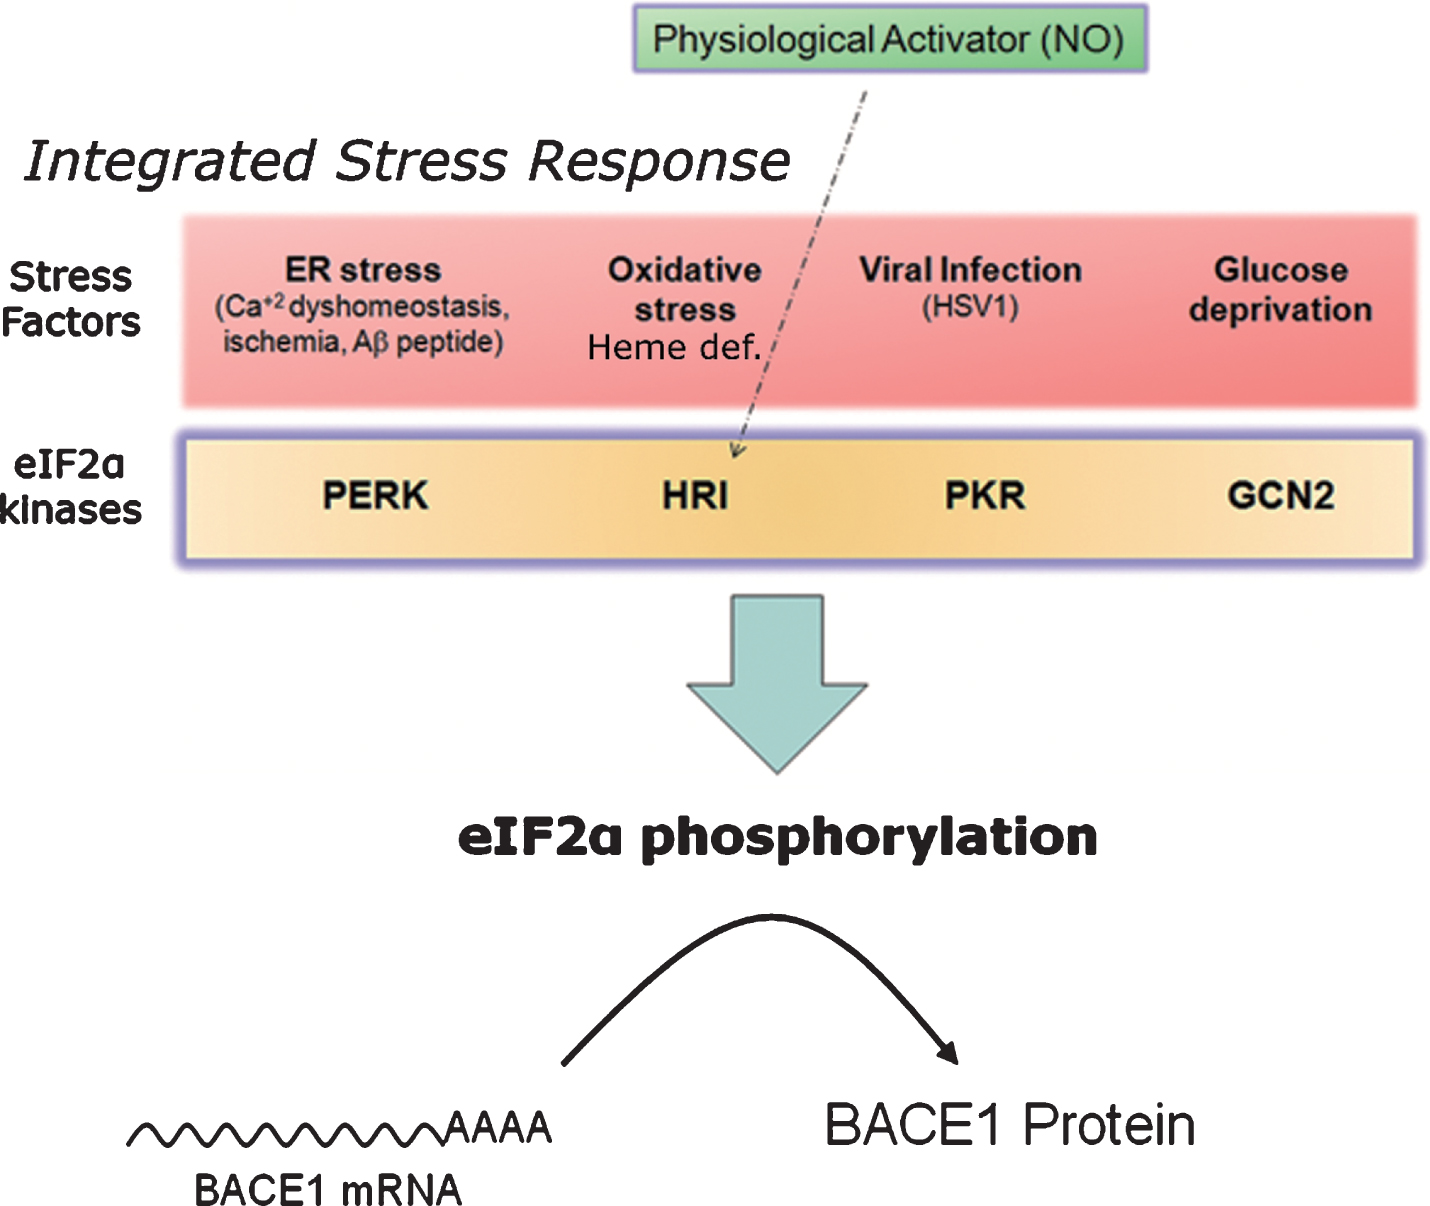 Nitric oxide: a master physiological mediator hovering above the integrated stress response? The four existing eIF2α-kinases (PERK, PKR, HRI, GCN2) share a common catalytic-domain and harbor different activator-domains endowing each kinase with a differential sensitivity to stress. Following stress sensing, eIF2α-kinases phosphorylate eIF2α and shut down protein translation in a process known as integrated stress response. This process aims, for example, at securing metabolic resources under energy deprivation conditions, alleviating protein load in the endoplasmic reticulum under missfolding protein conditions, or at avoiding the translation of exogenous proteins from viral origin. In the absence of stress, nitric oxide (NO) signals through the Heme-regulated eIF2α-kinase (HRI), activating thereby BACE1 translation from its mRNA in a physiological setting.